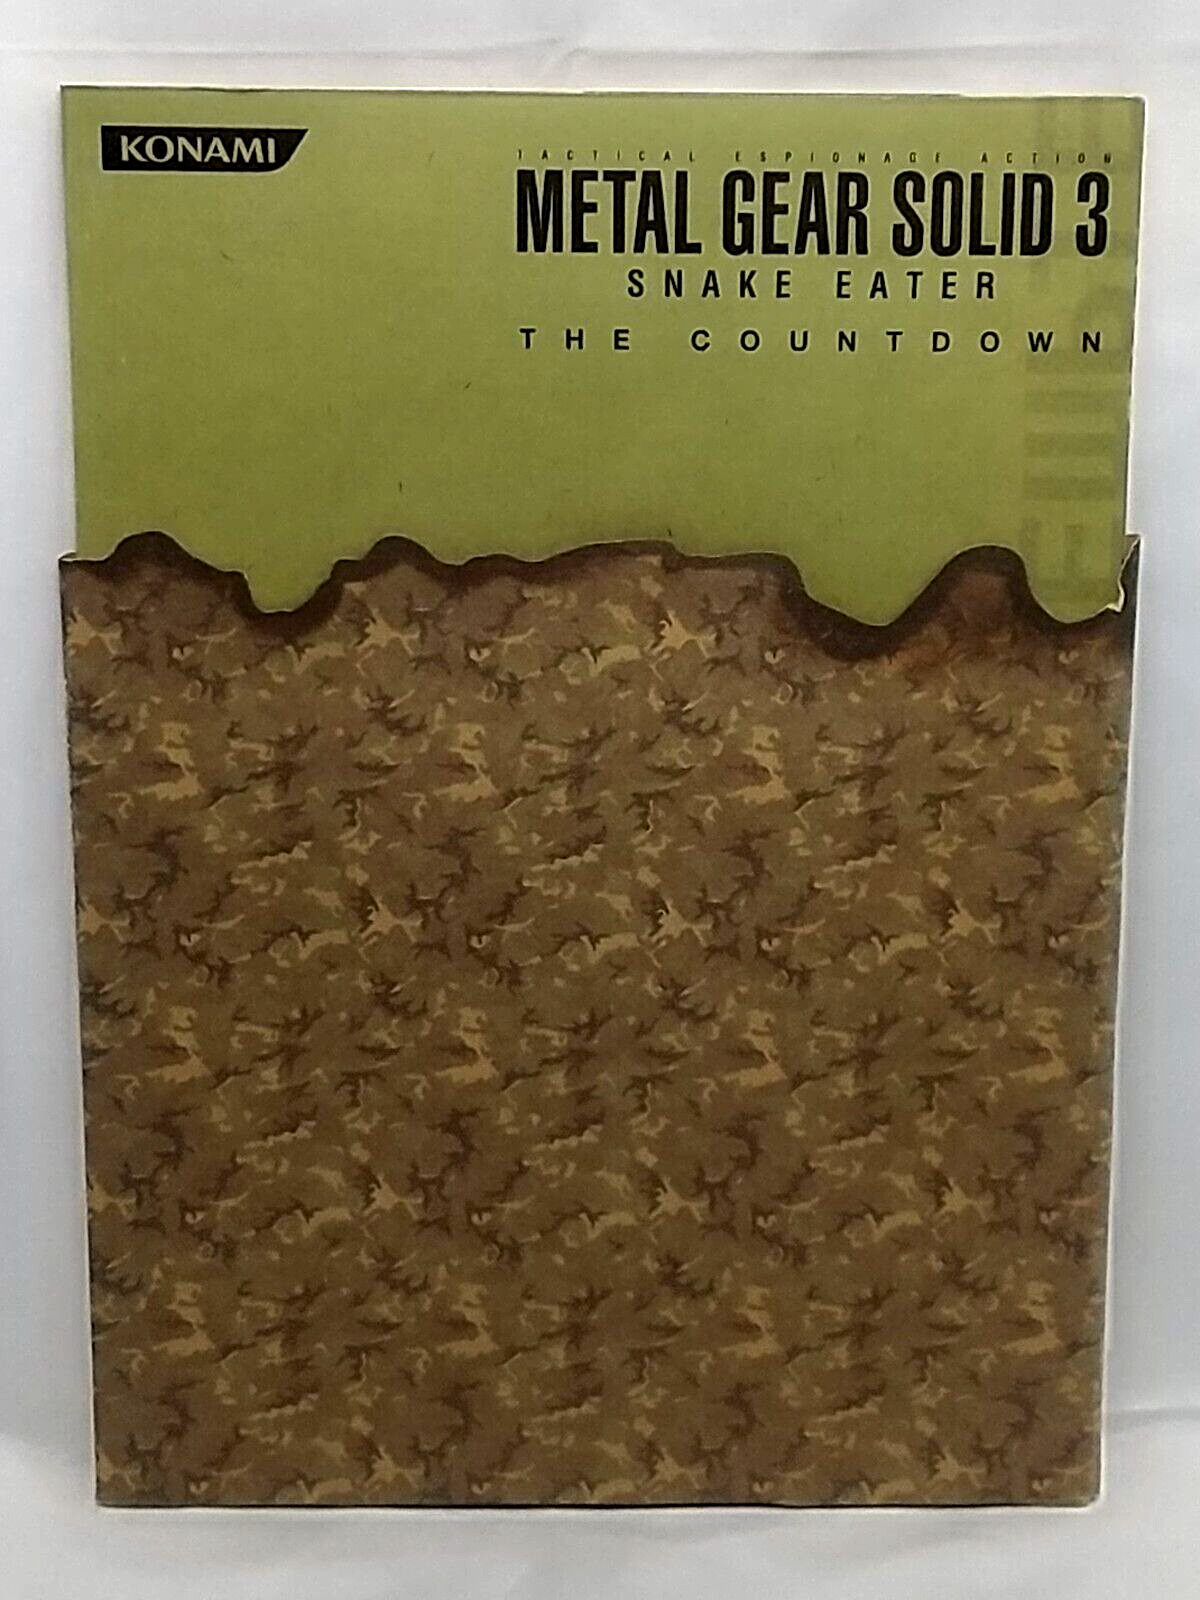 Metal Gear Solid 3 Snake Eater The Countdown Art Book